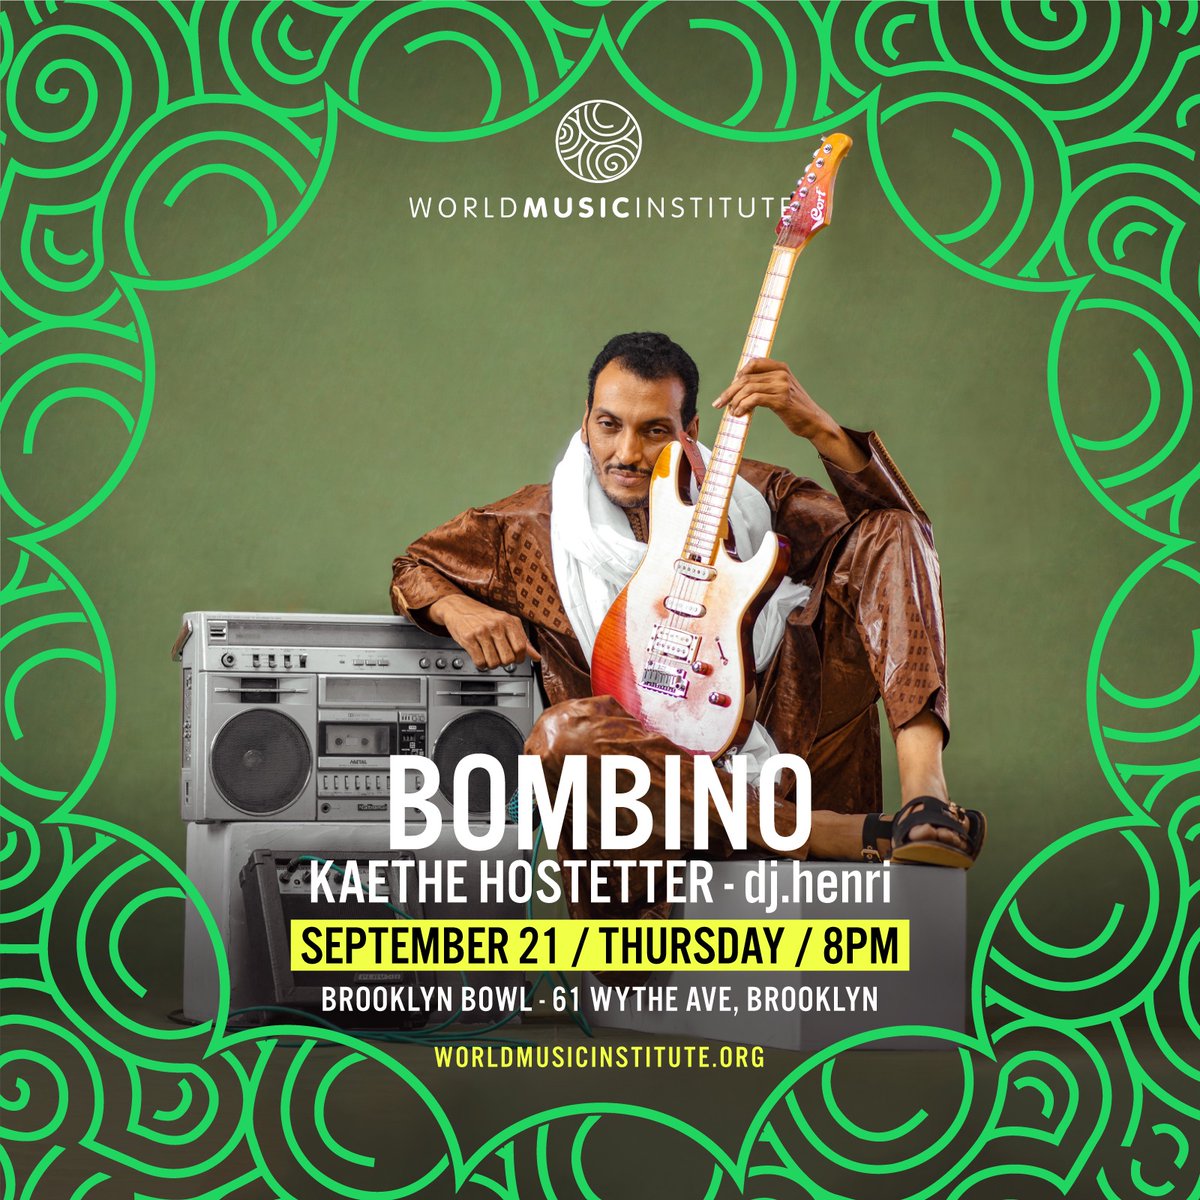 TONIGHT! Get ready for an intimate and electric show from The Sultan of Shred, Bombino! Don't miss a standout set from violinist Kaethe Hostetter and afro-beats by dj.henri kicking off the show 🎸 🎟️ Tickets still available at brooklynbowl.com